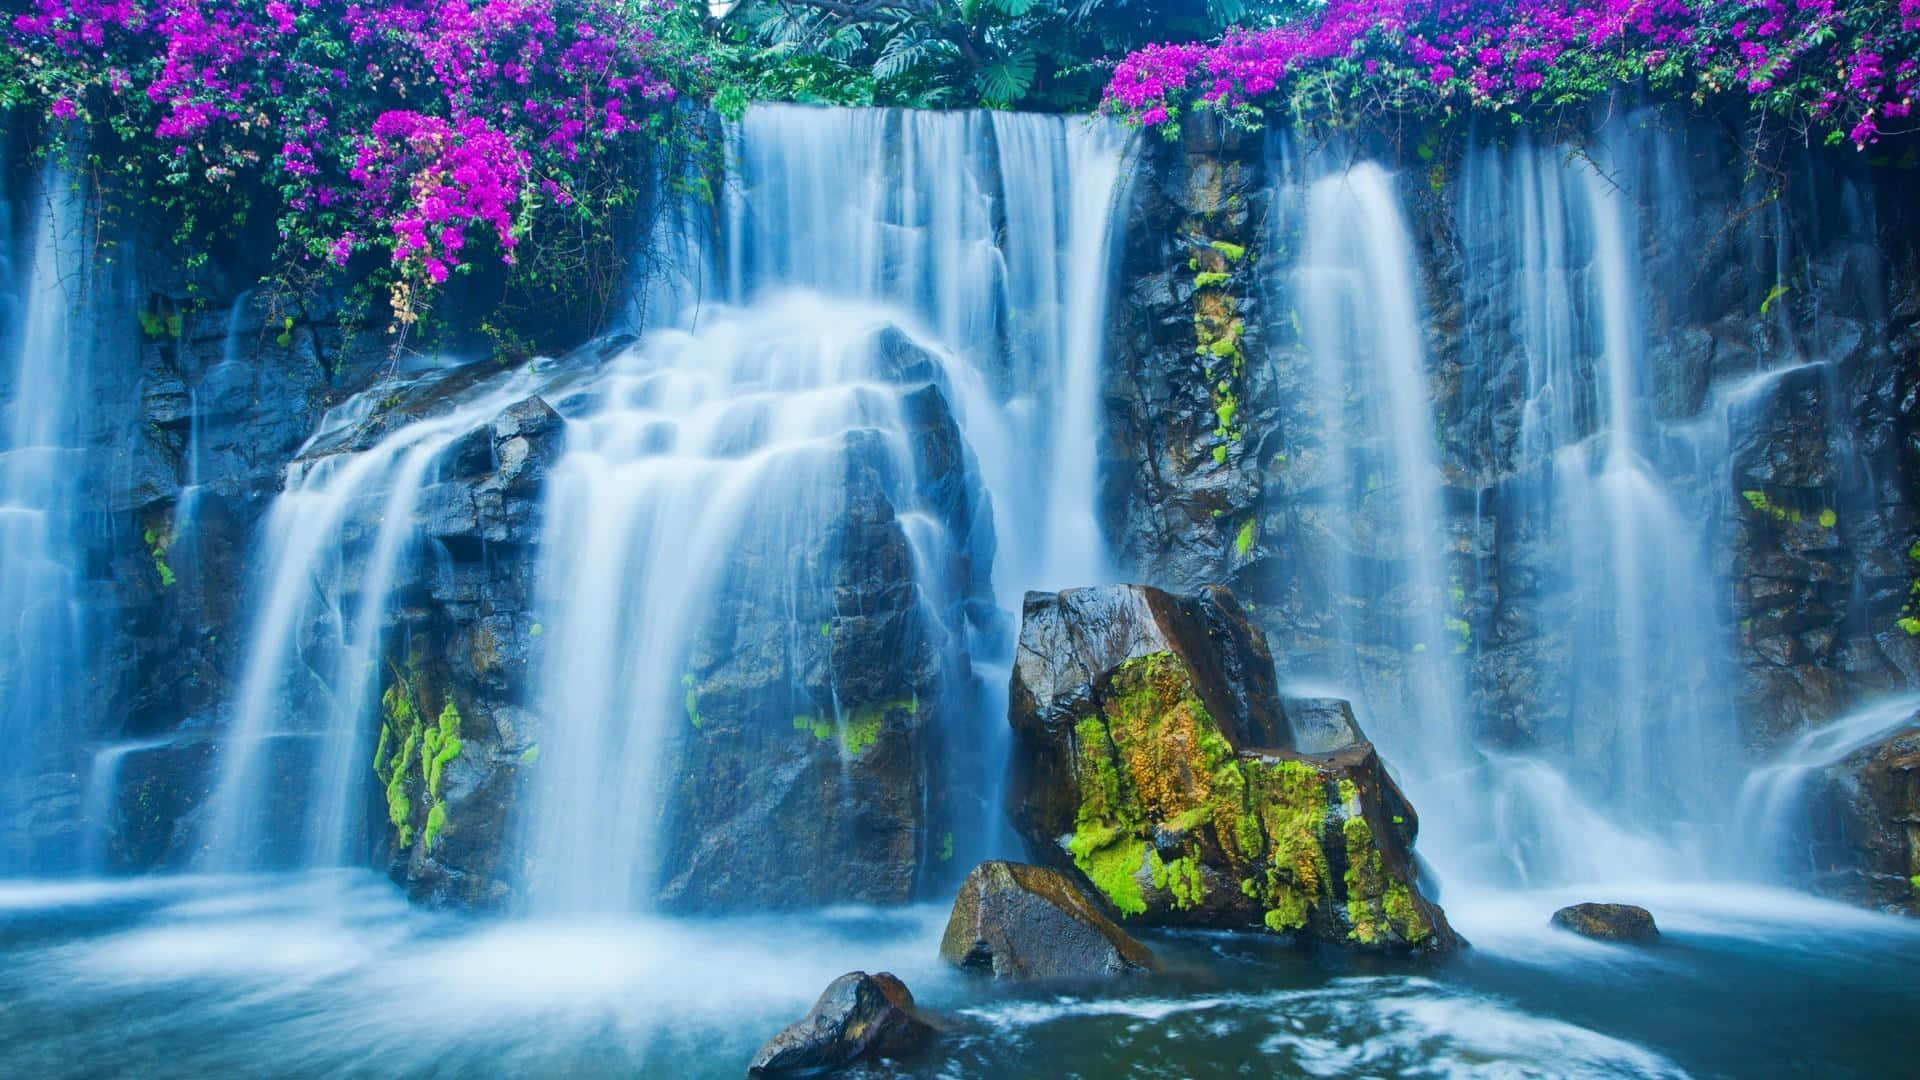 Explore the beauty of nature with this stunning picture of a majestic waterfall